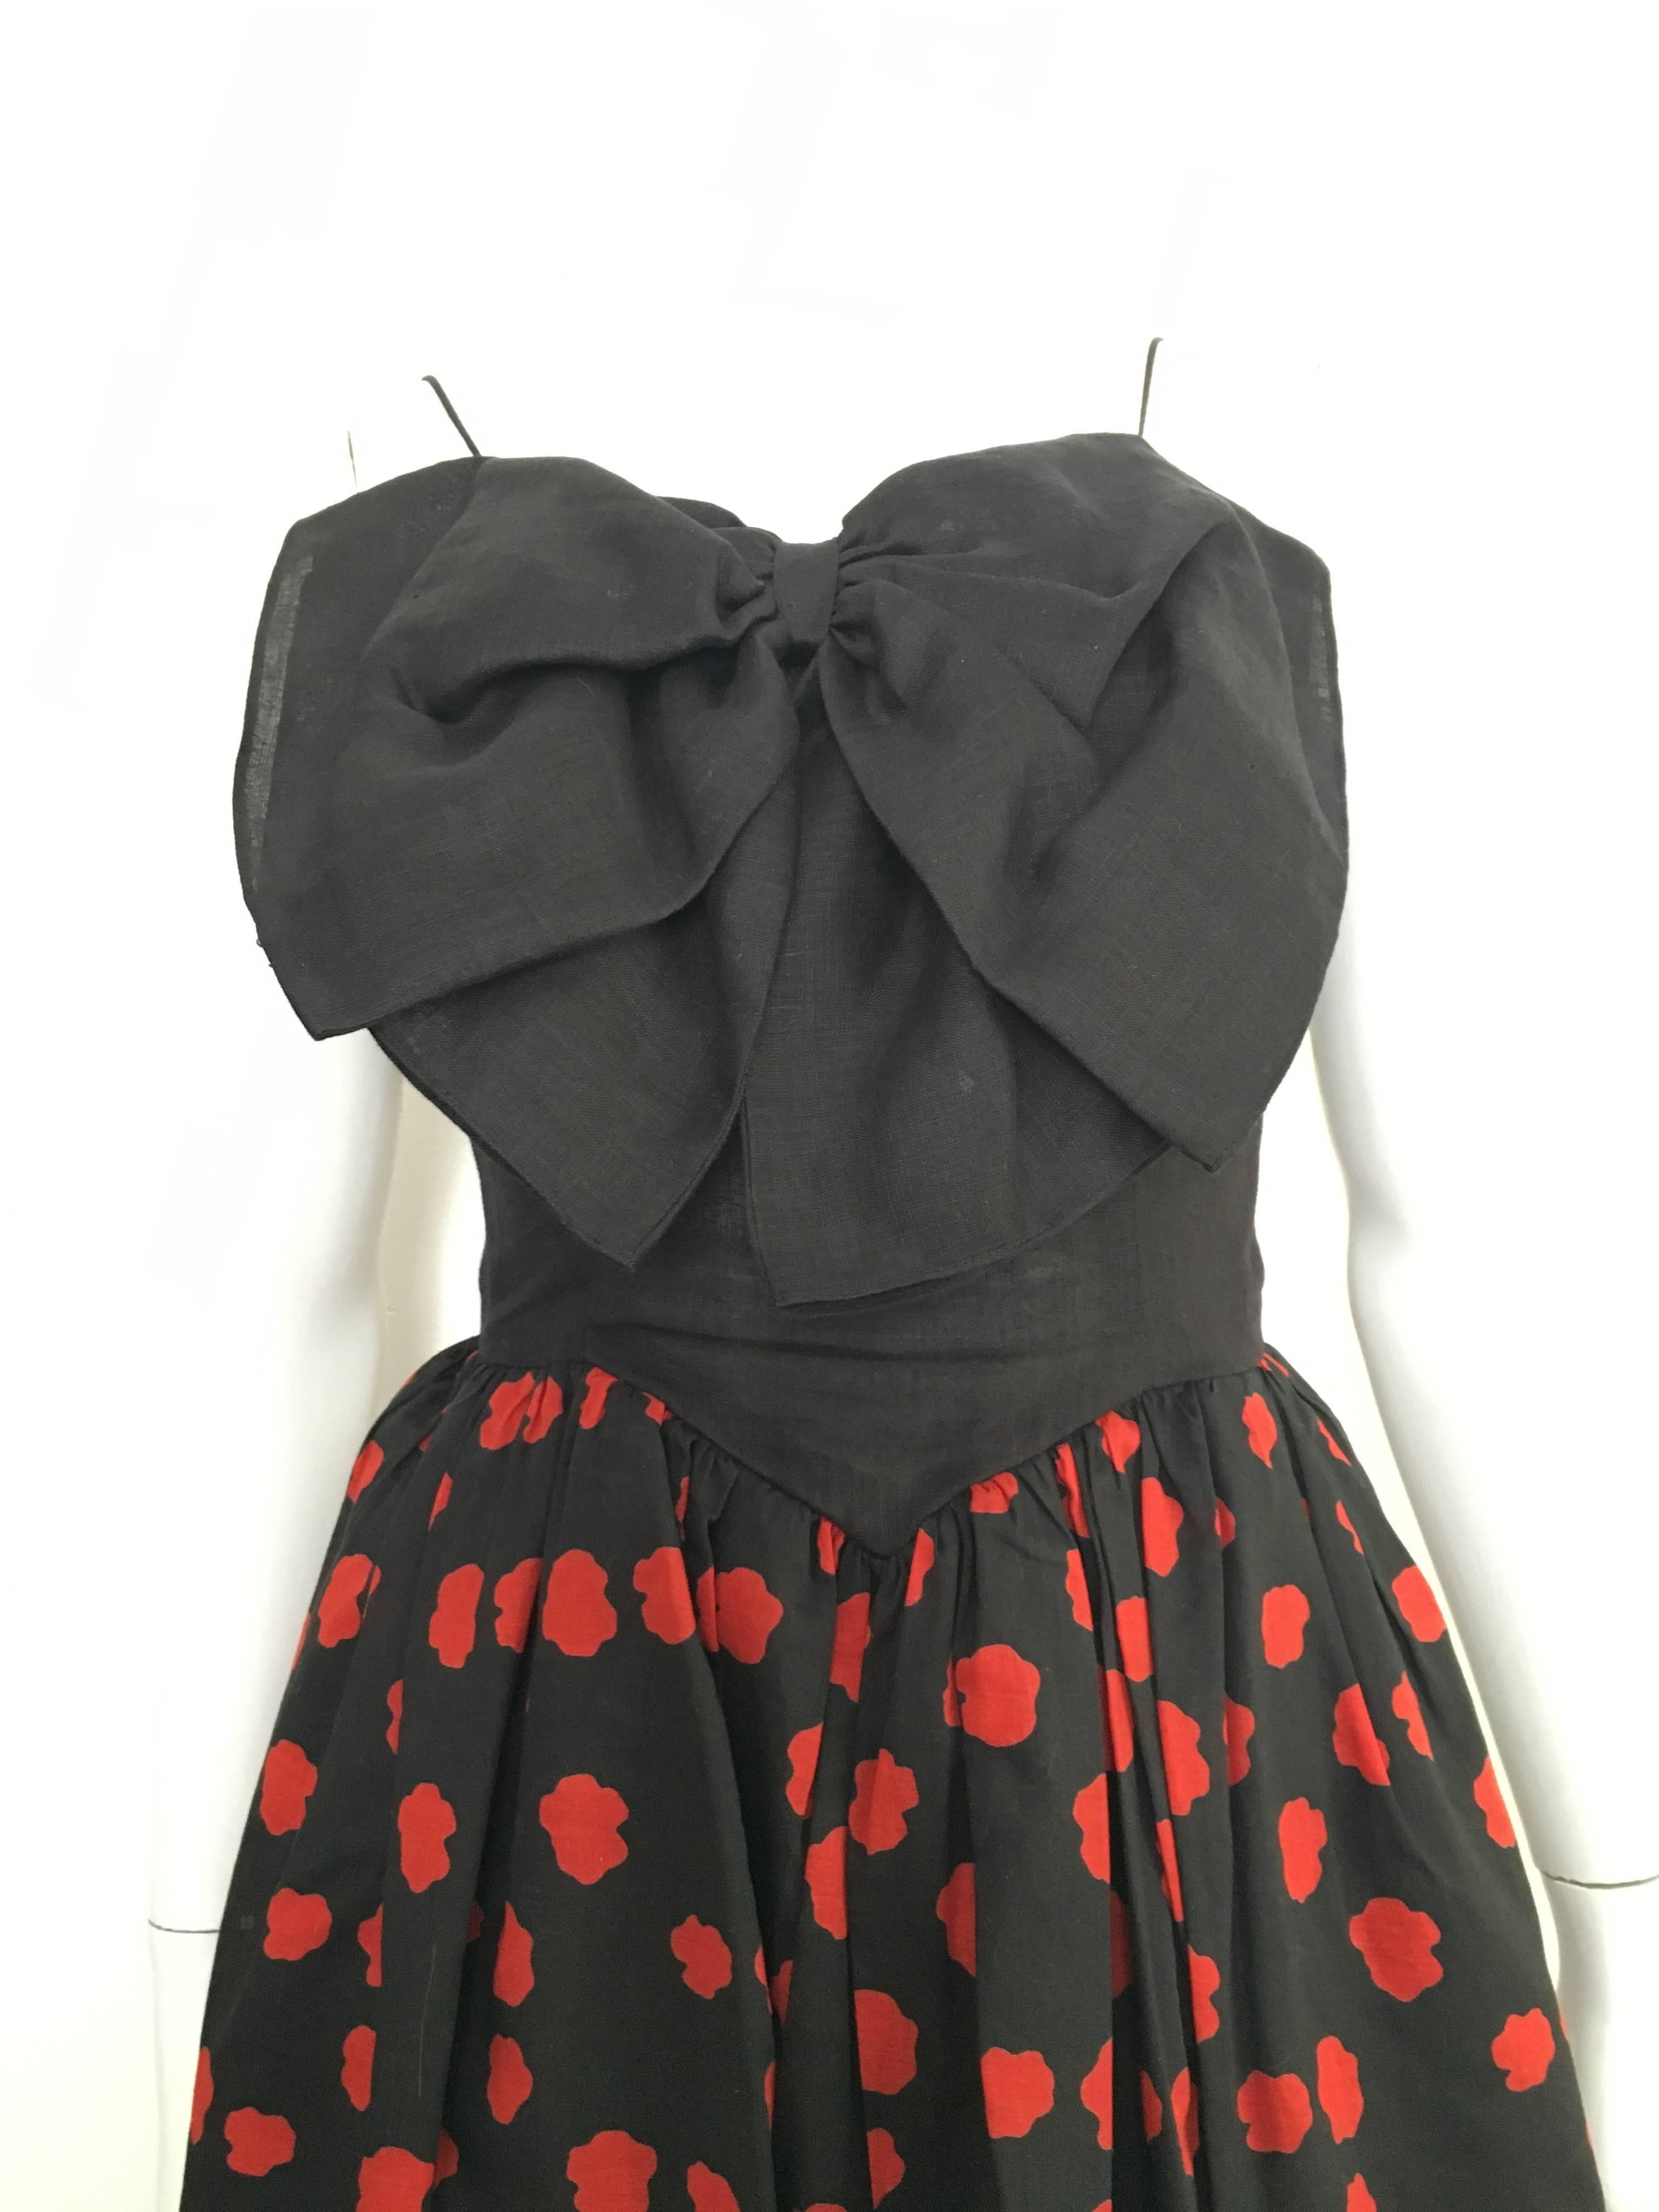 Bill Blass Collection III 1983 black linen bodice with bow spaghetti strap and floral design cotton skirt dress with pockets is a size 6 but fits a modern size 4. Ladies please use your measuring tape to properly measure your bust, waist & hips